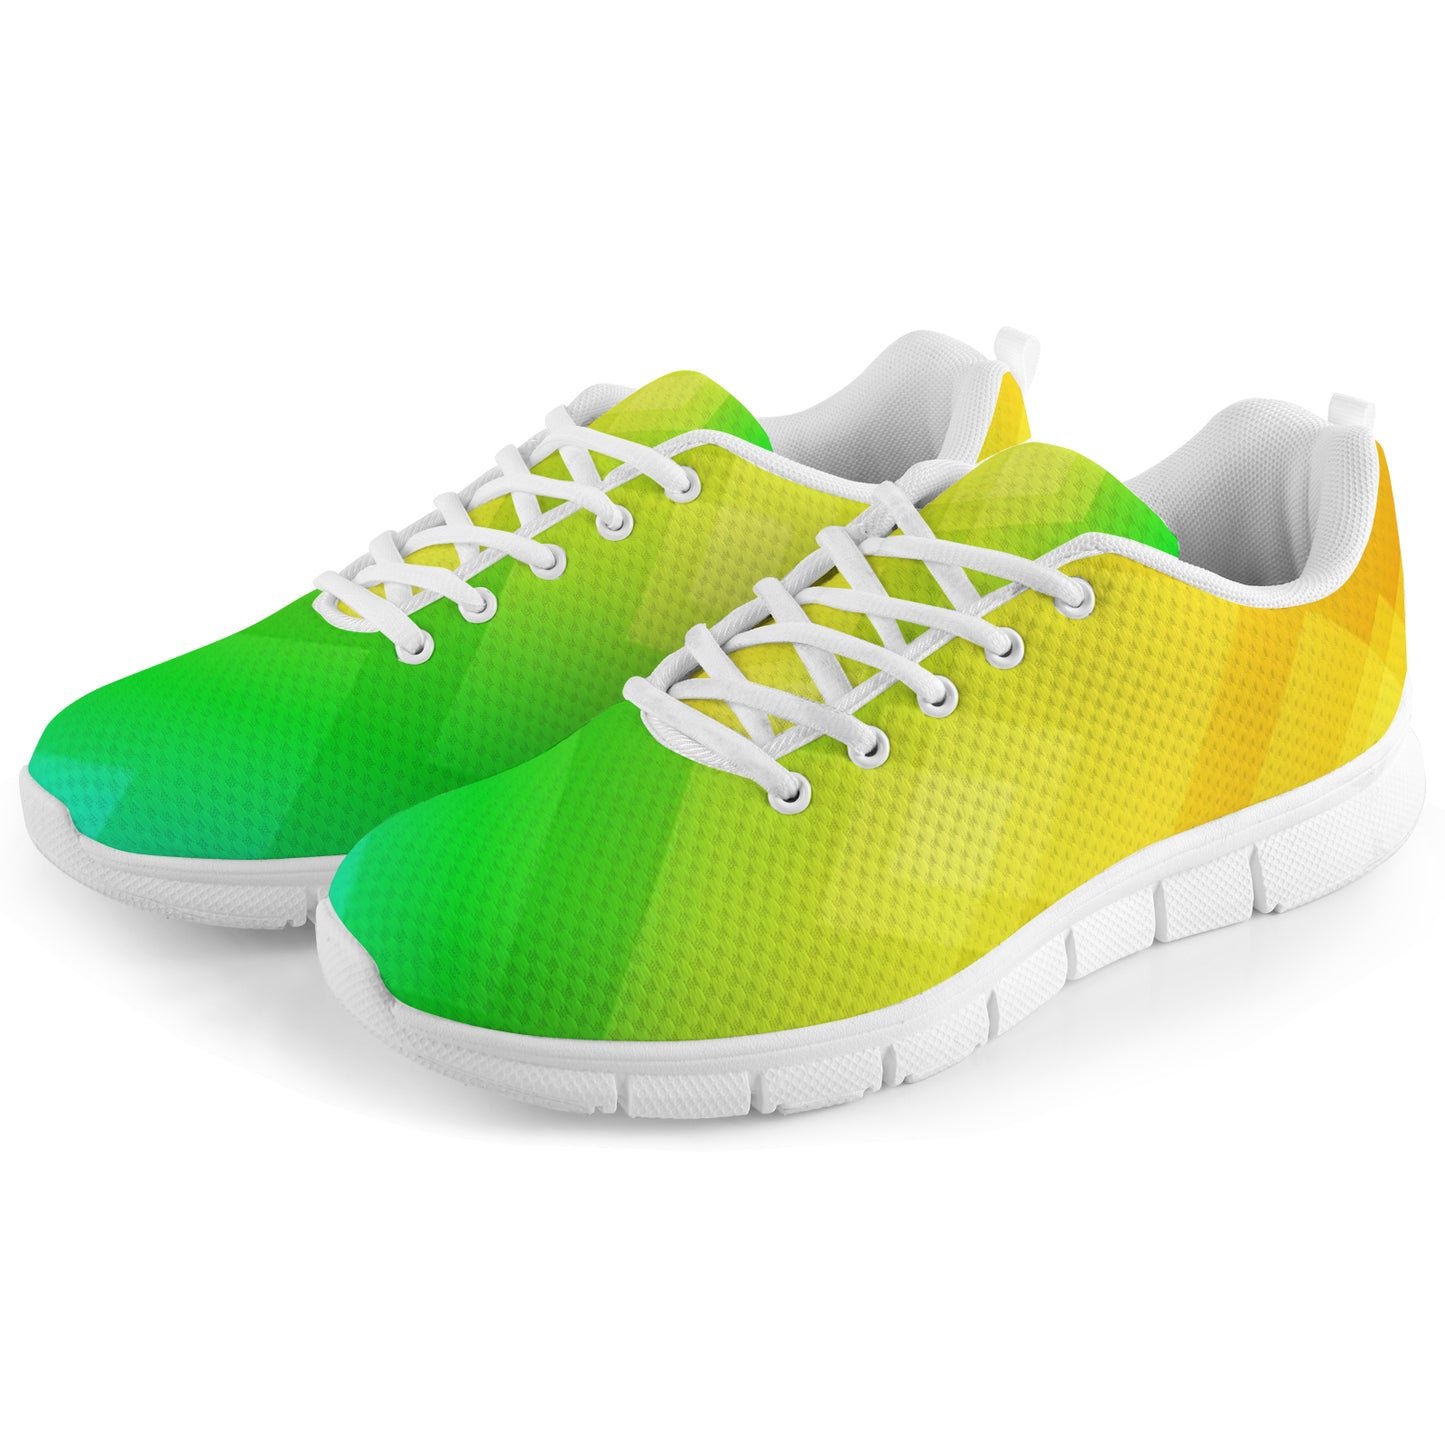 Men's Breathable Sneakers - Green/Yellow Combo